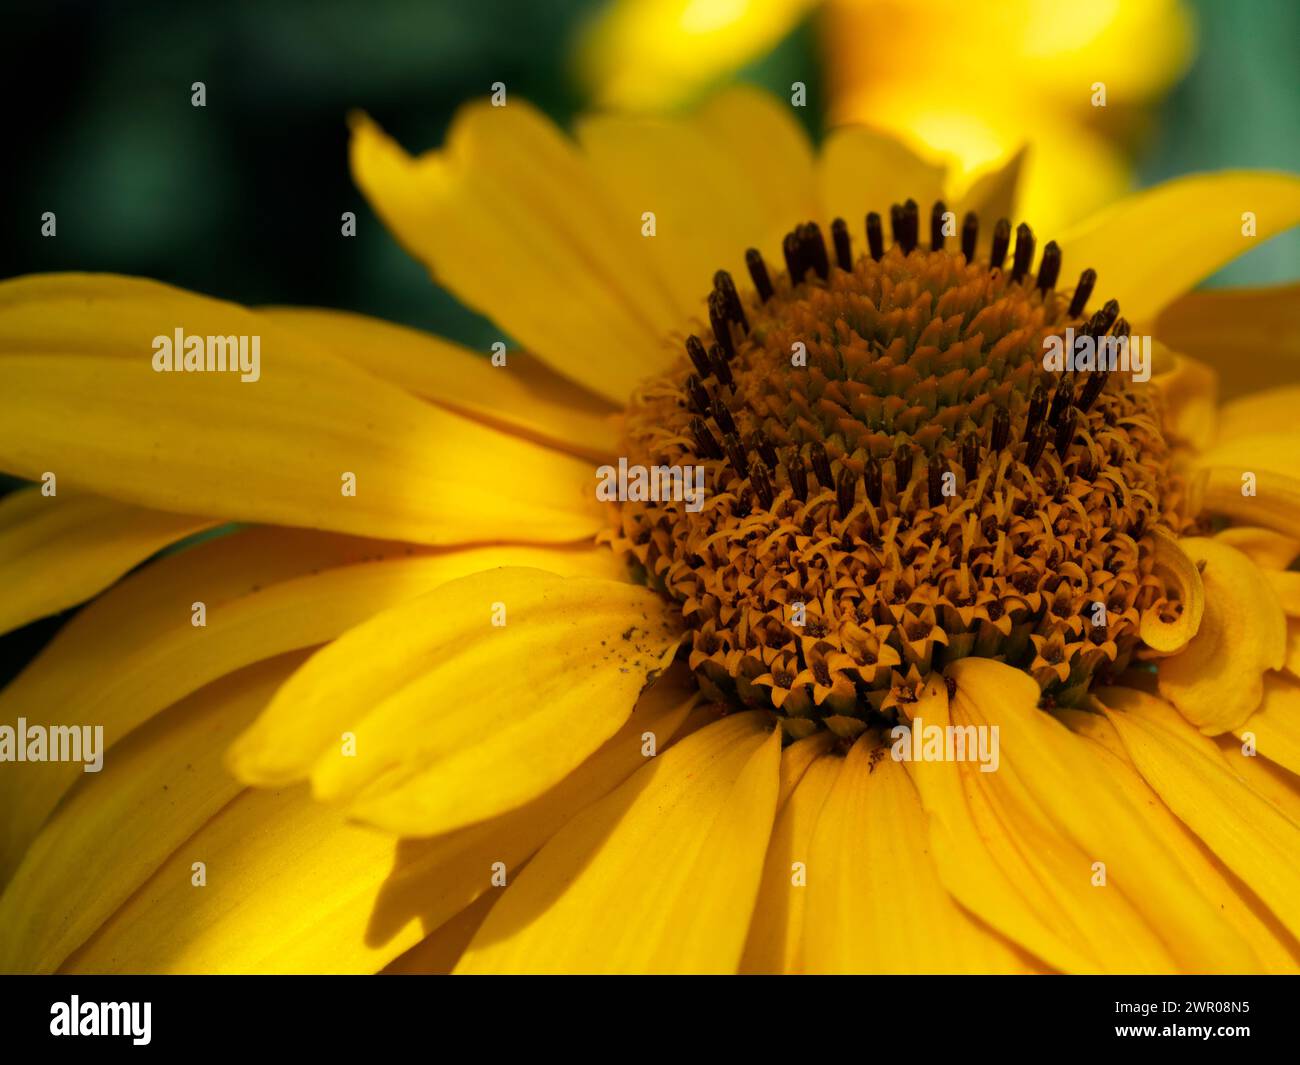 A close-up of a yellow flower with a detailed, textured center and soft petals. Stock Photo